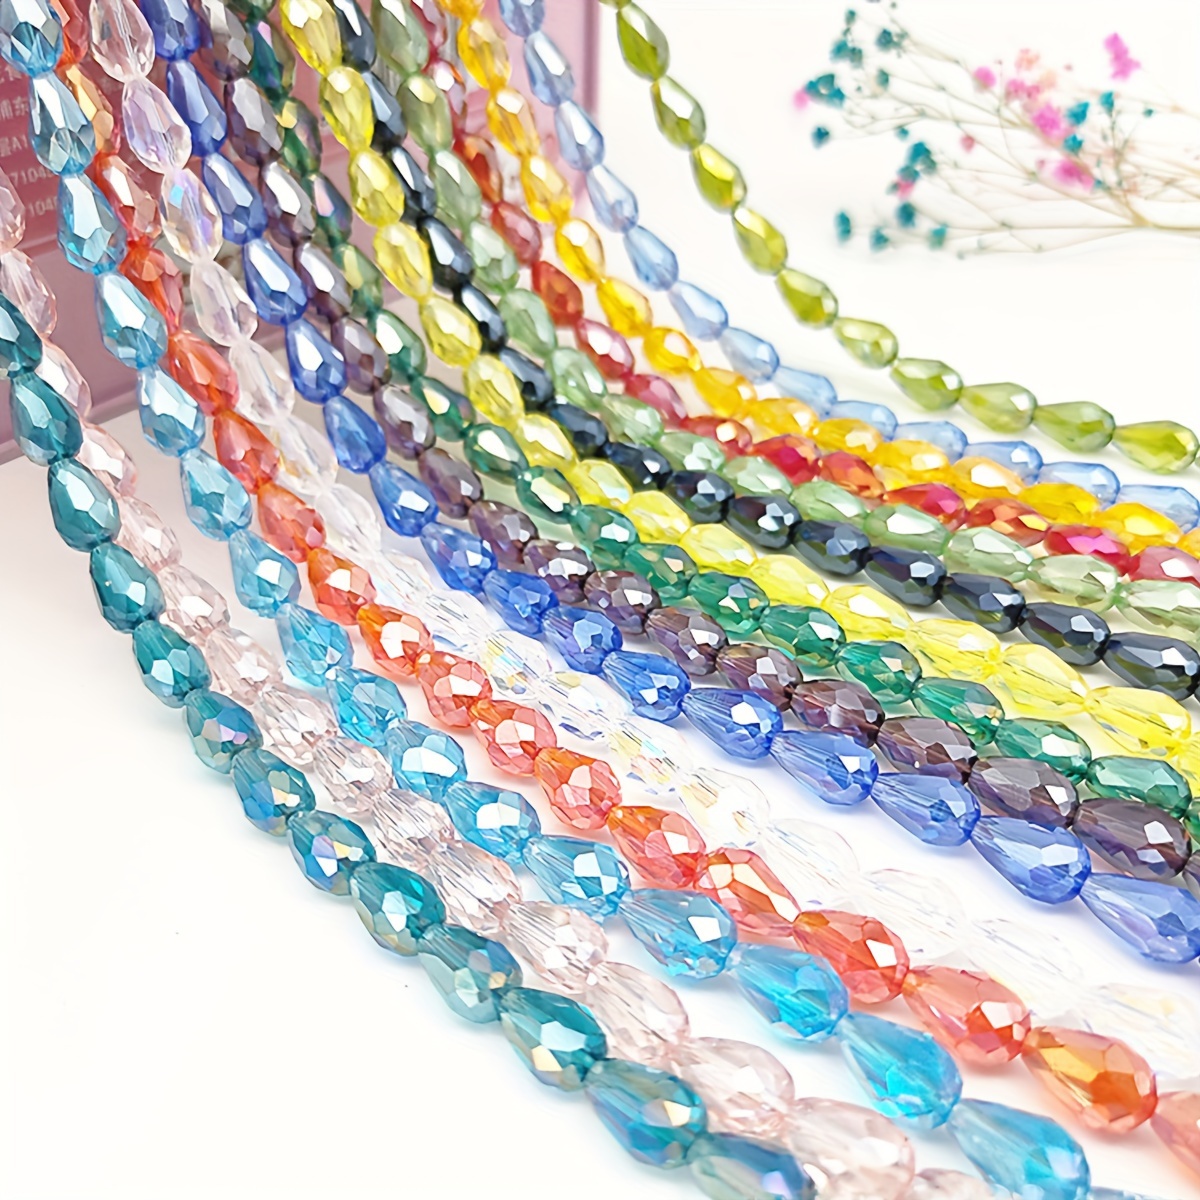 Efivs Arts Glass Seed Beads for Bracelet Making Kit, 24 Colors 6/0 4mm  Bracelets Beads Small Pony Beads Multicolor Beading Beads with Container  Box